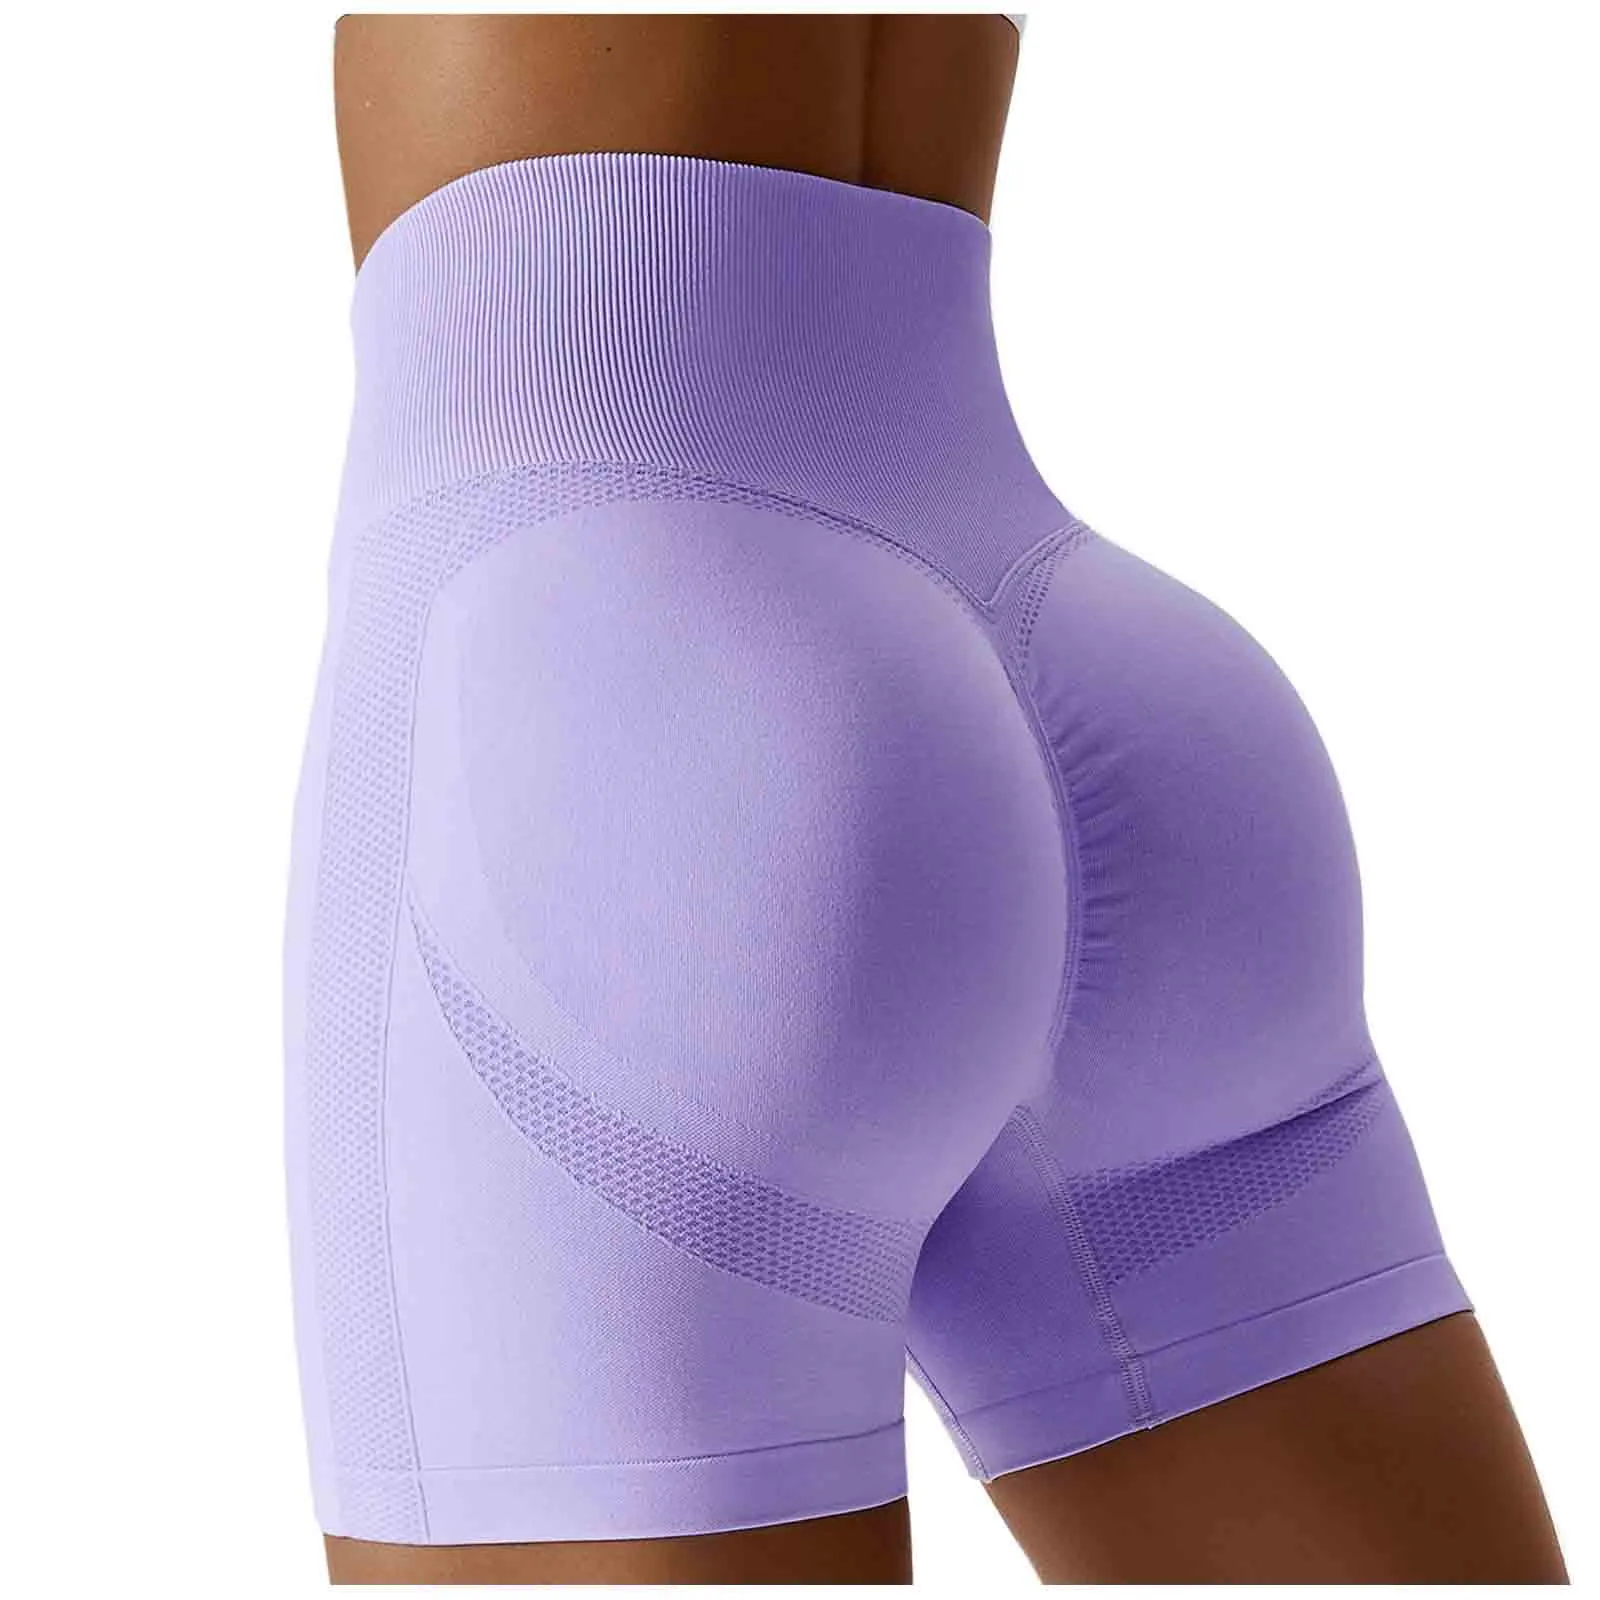 

Women's Sports Leggings High Waist Opa Butt Push Up Booty Leggings Seamless Compression Gym Short Pants For Sports, Yoga Workout